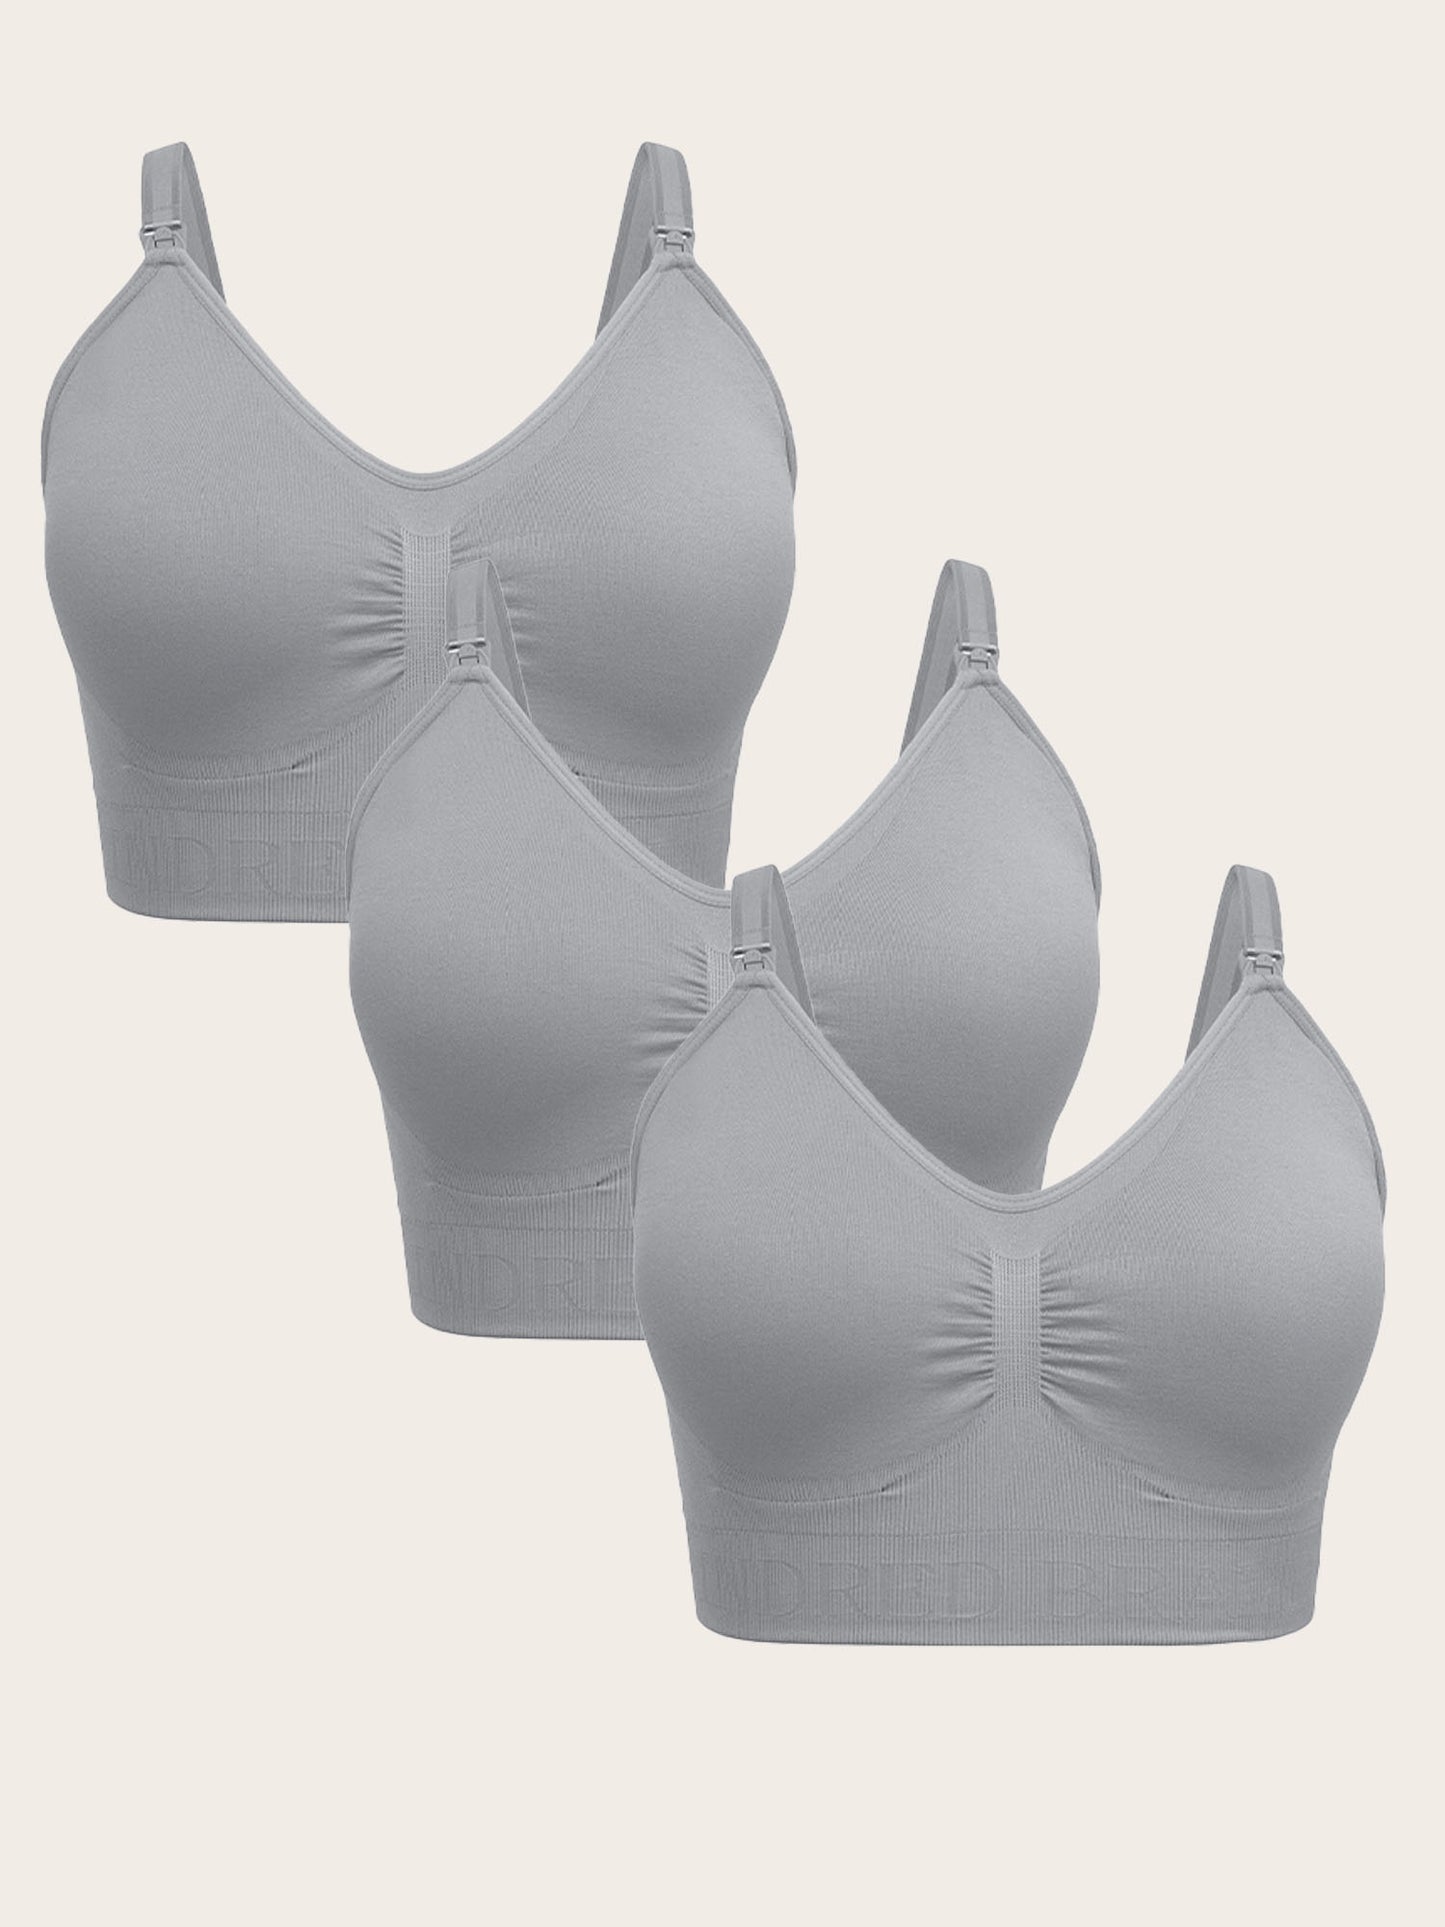 What To Look for in a Maternity Bra - ElderBerries!